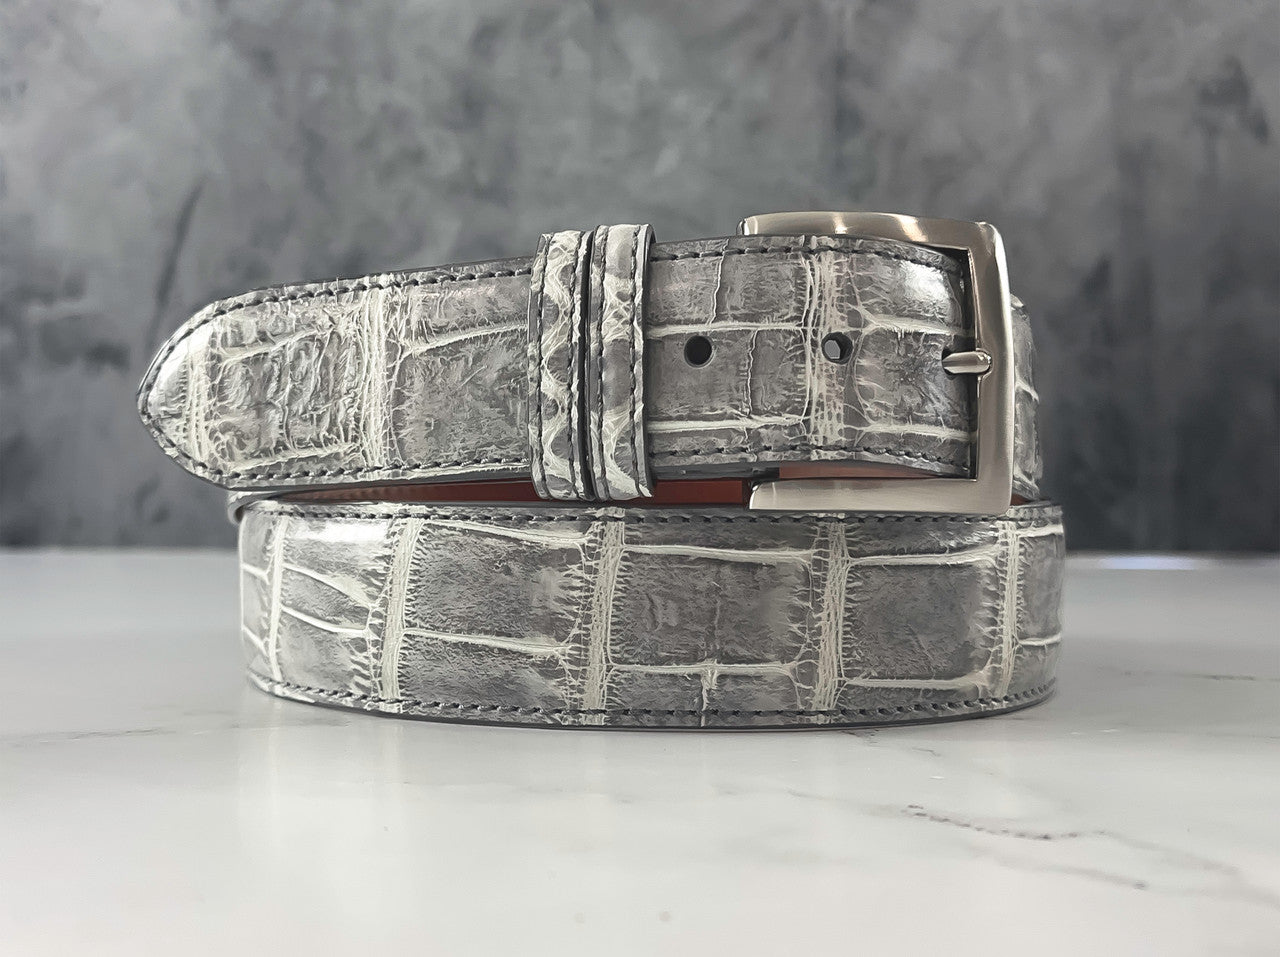 Hand-painted American Alligator Belt: Grey and White (The DJ)